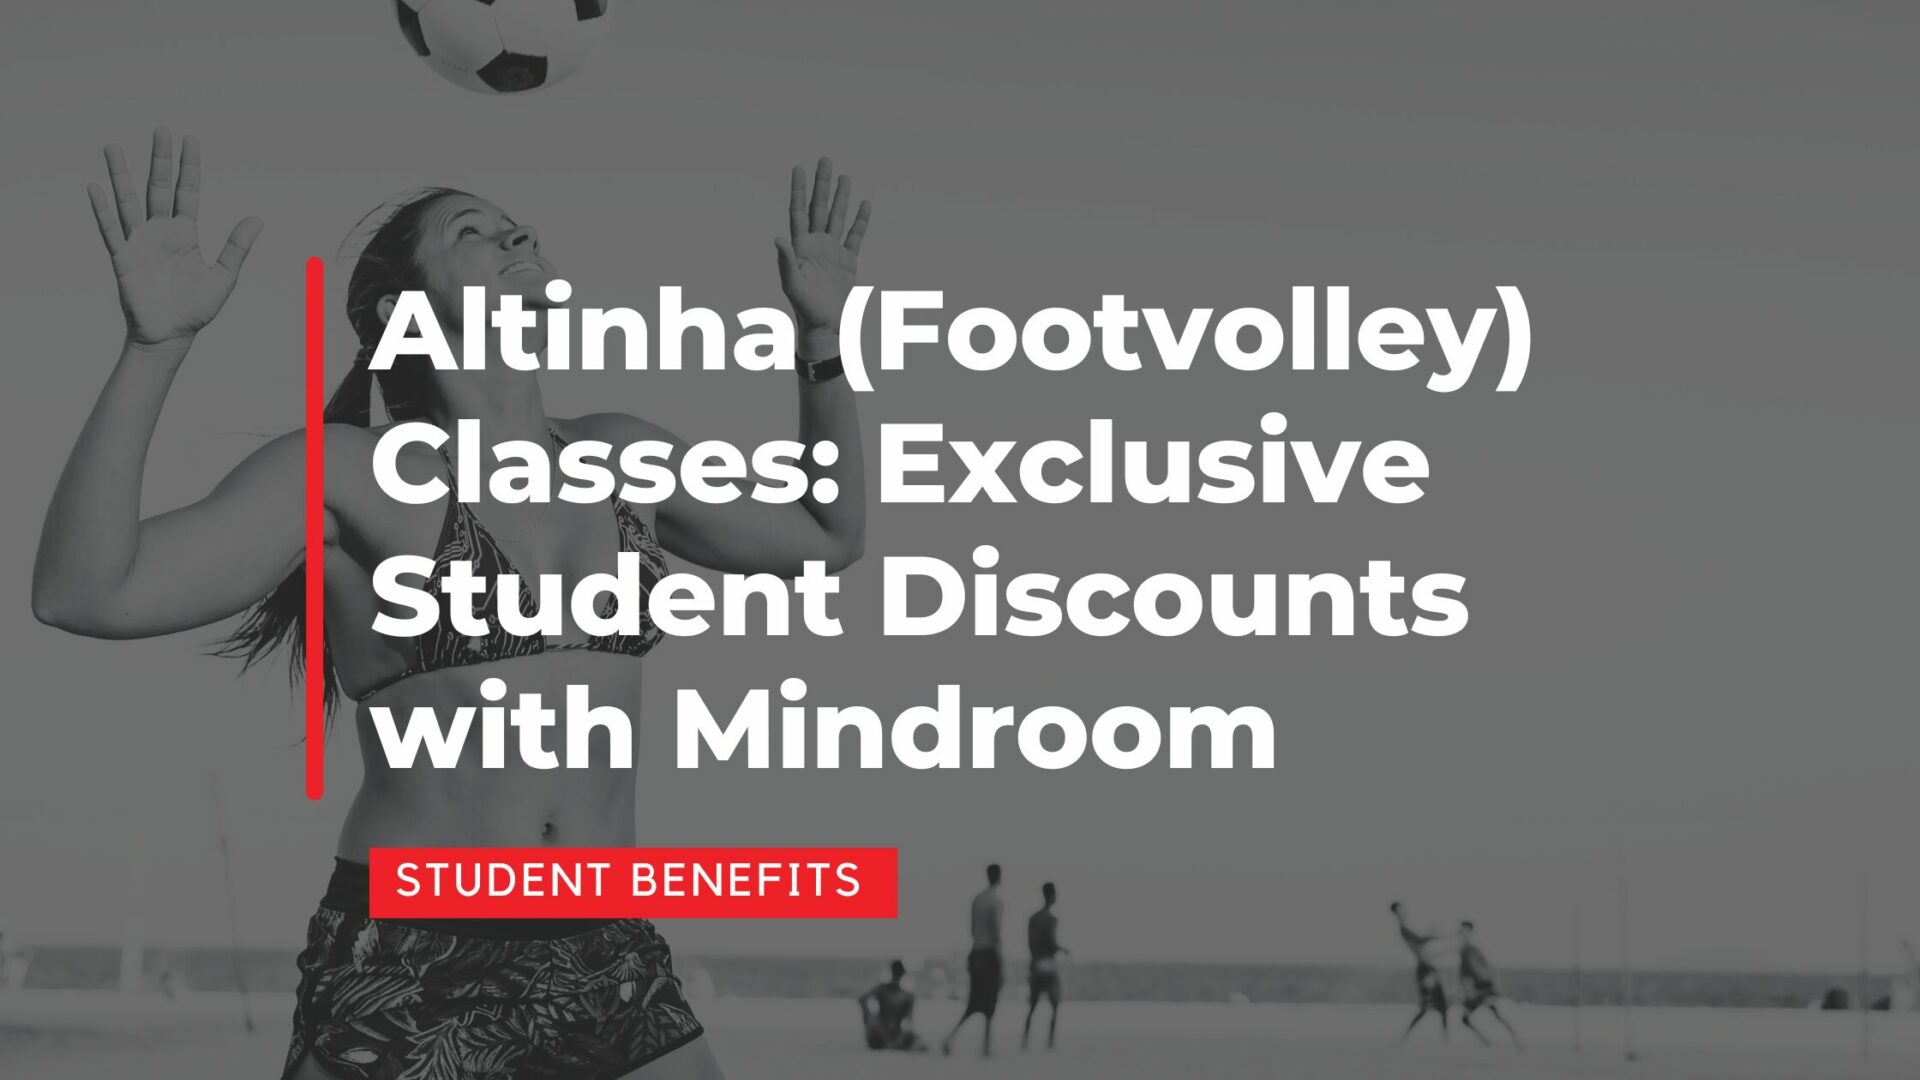 Altinha (Footvolley) Classes: Exclusive Student Discounts with Mindroom